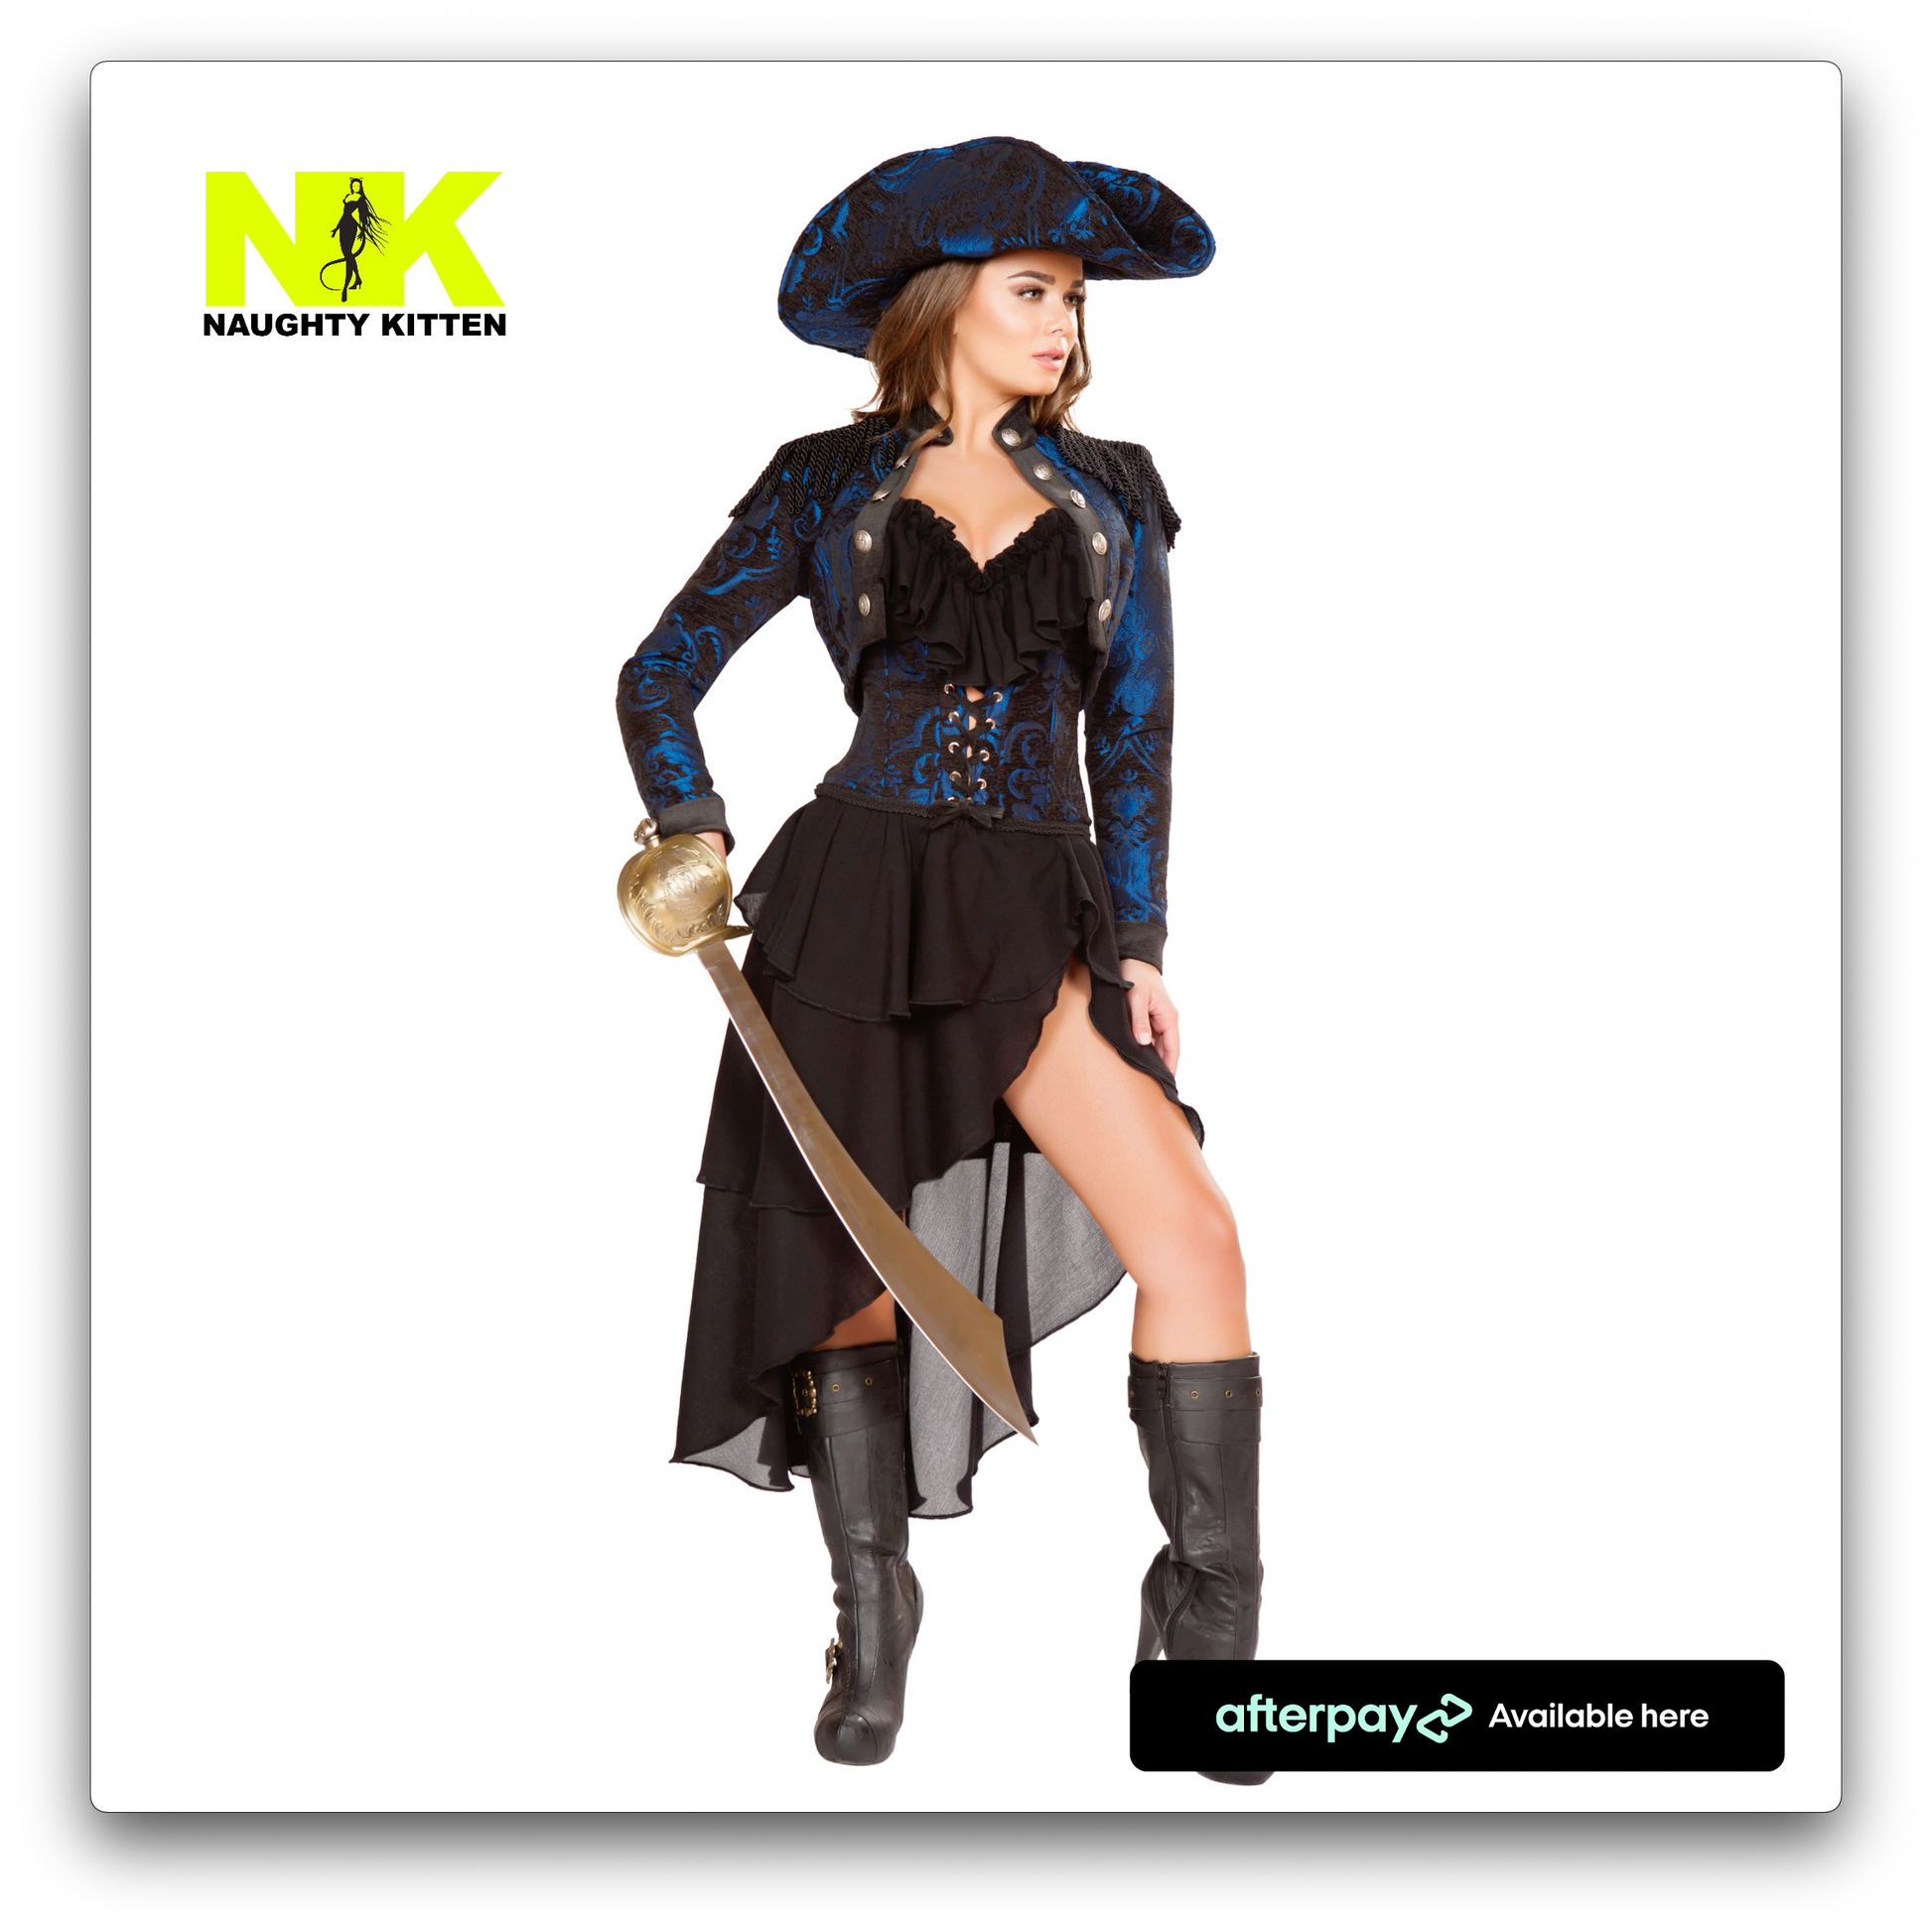 Captain of the Night Costume Front View - Naughty Kitten Clothing Halloween Costume